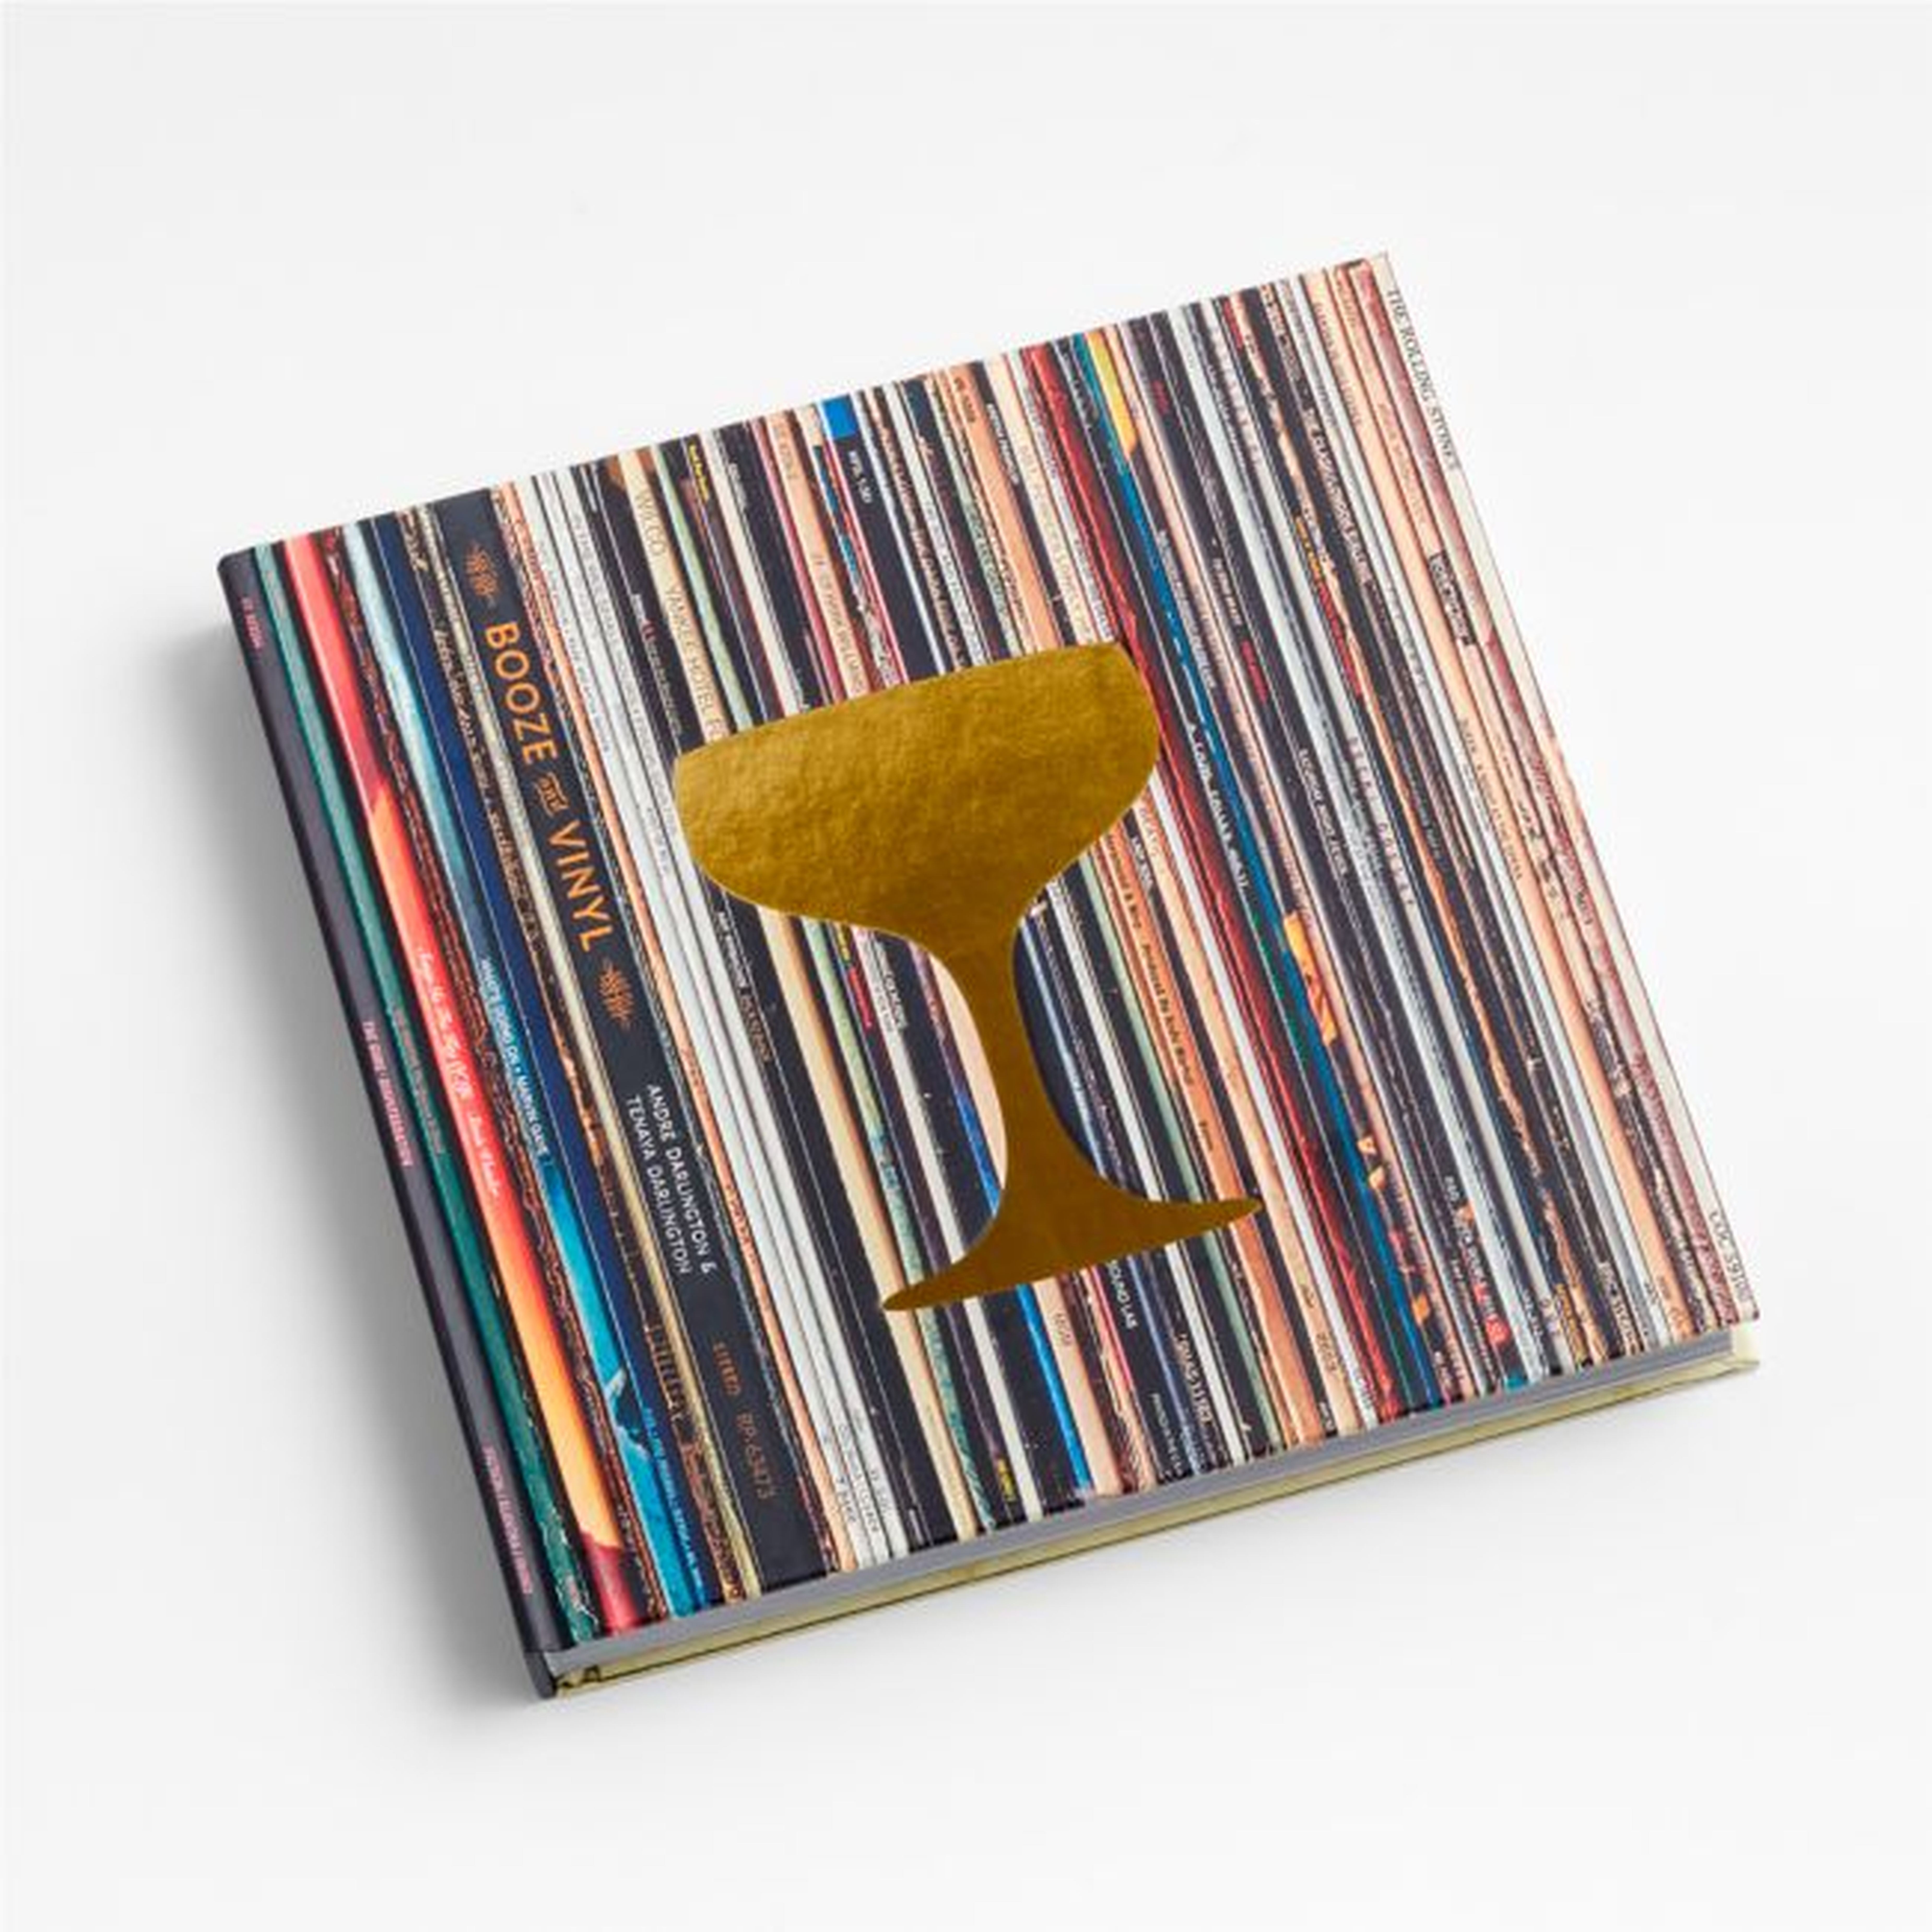 Booze and Vinyl Book - Crate and Barrel